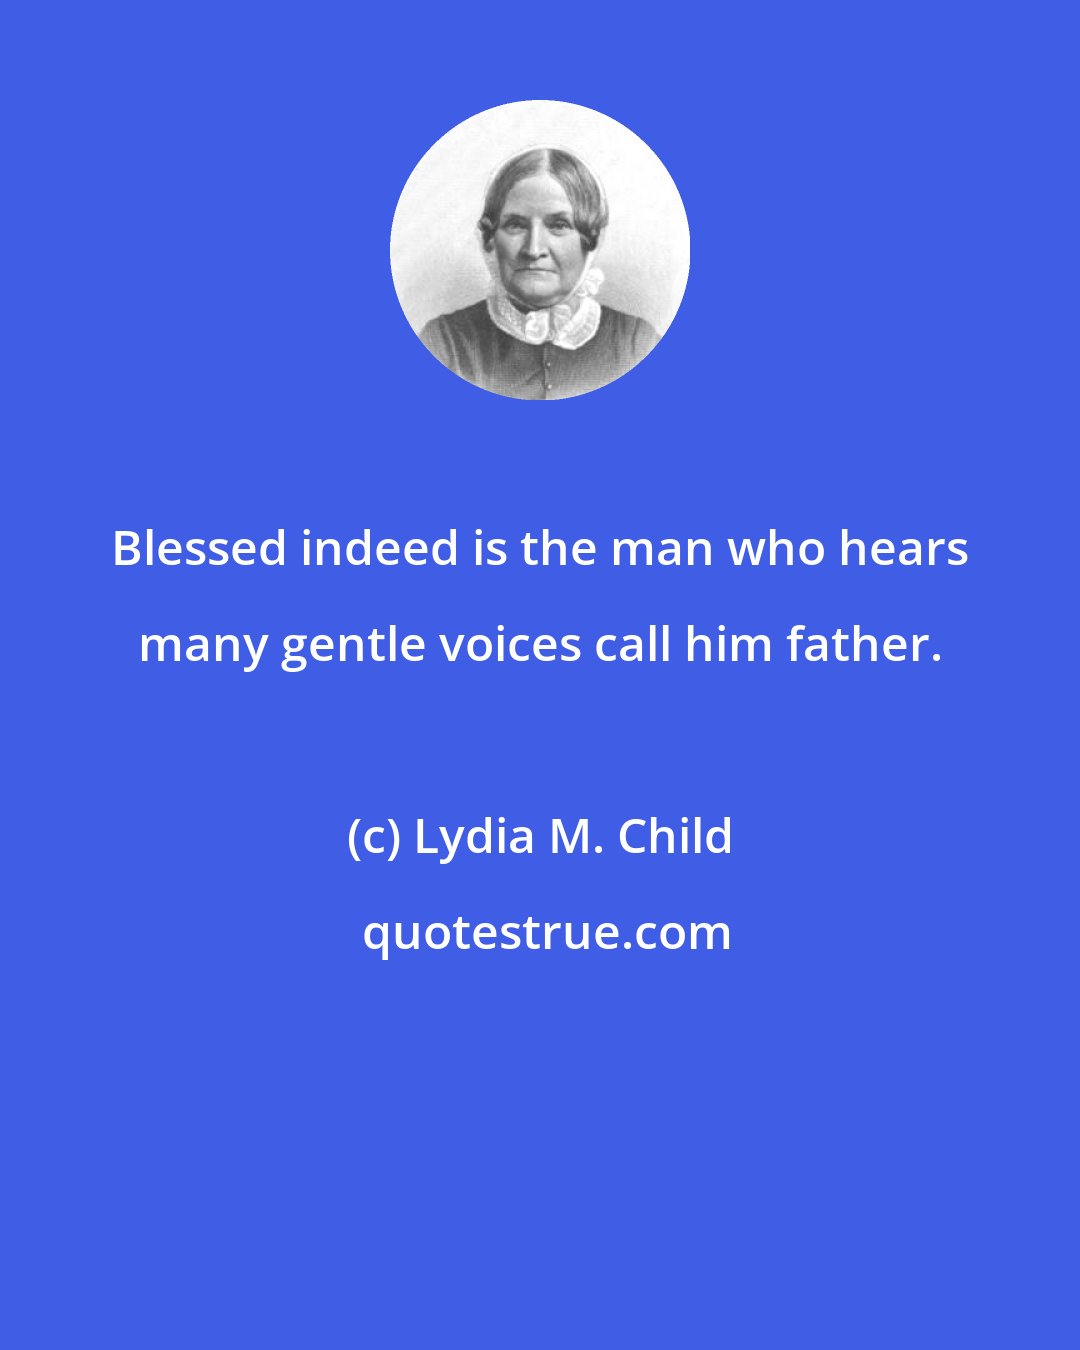 Lydia M. Child: Blessed indeed is the man who hears many gentle voices call him father.